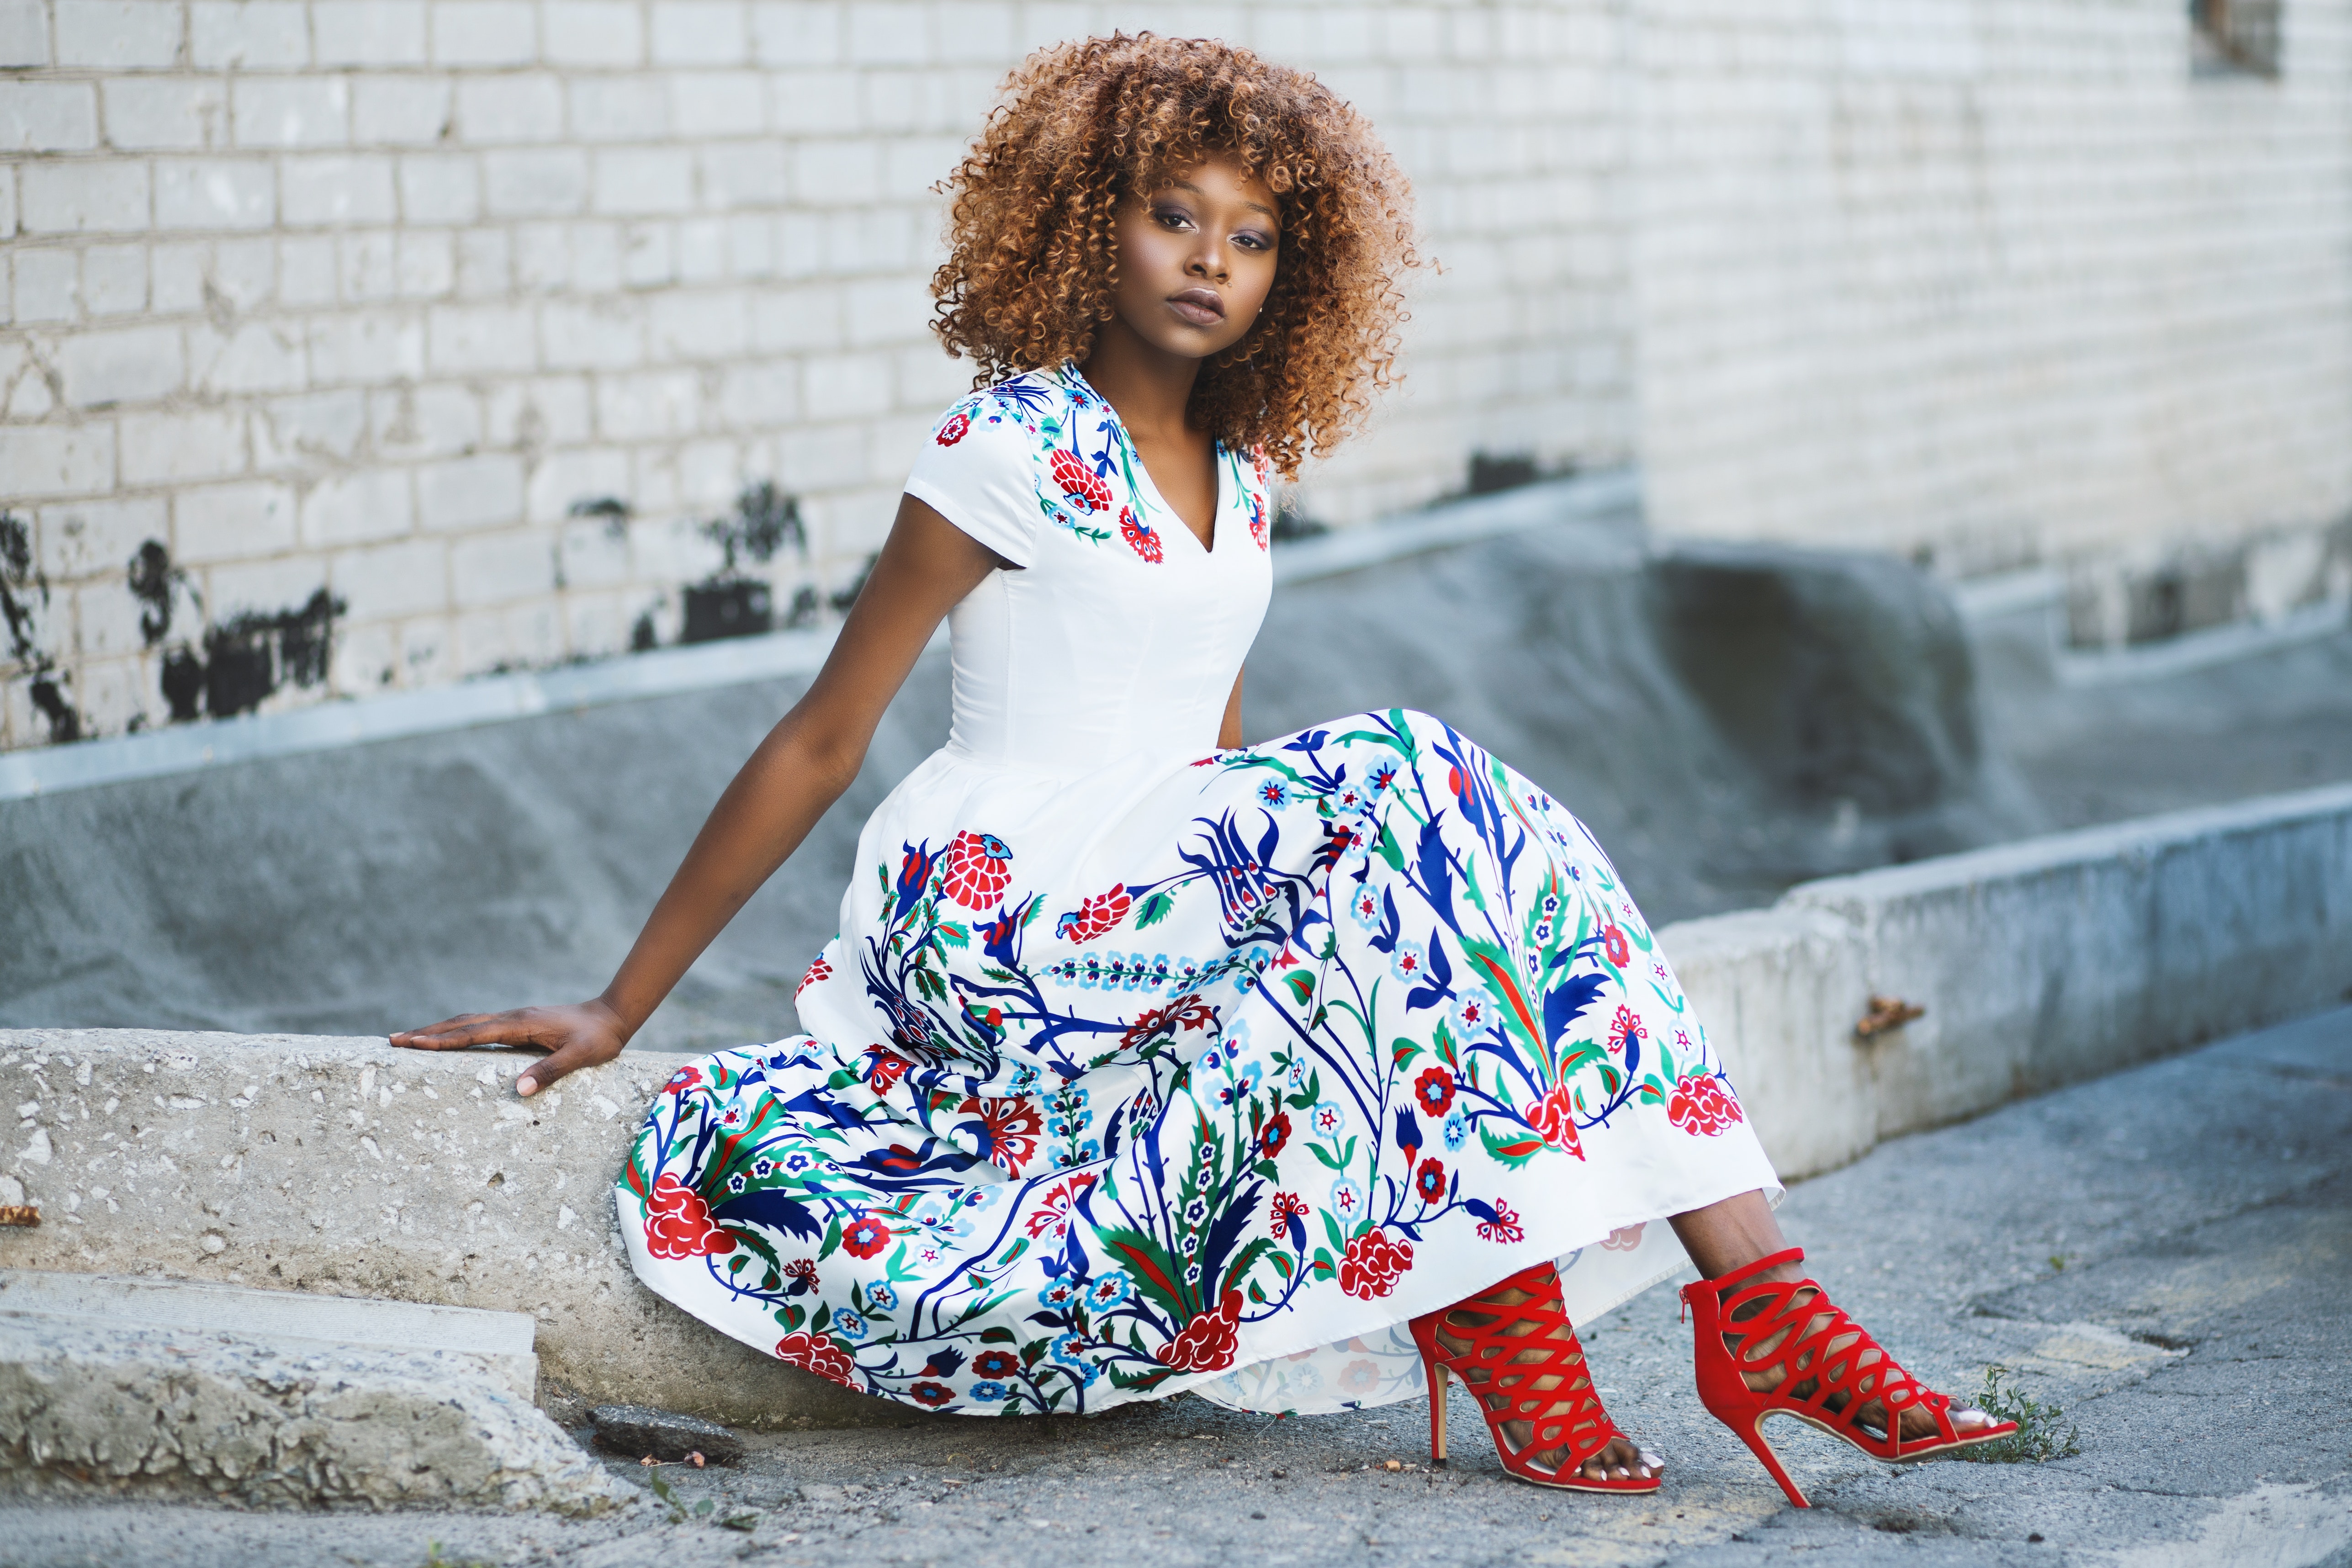 Woman in White and Multicolored Floral Flare Dress Sitting on Concrete, Attractive, Shoes, Person, Photoshoot, HQ Photo